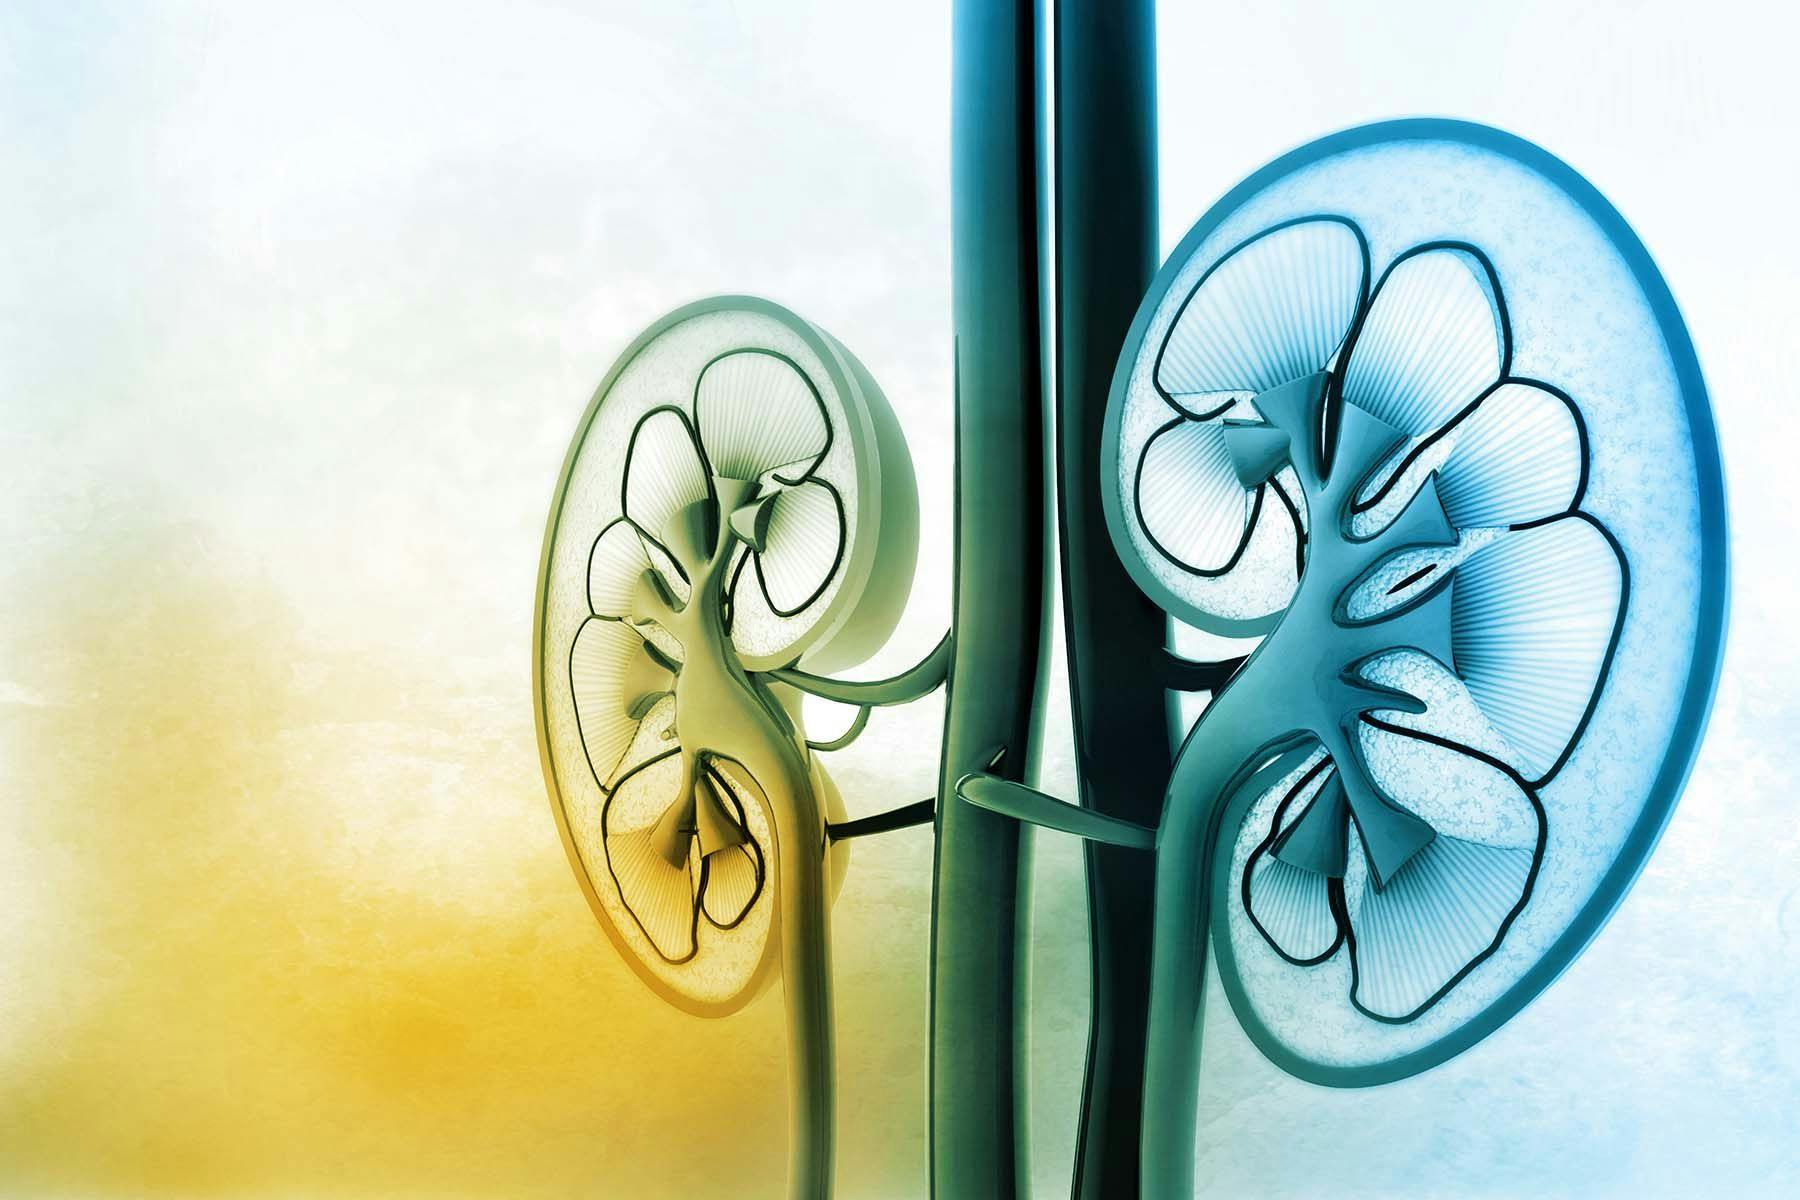 digital image of kidneys over a watercolor background